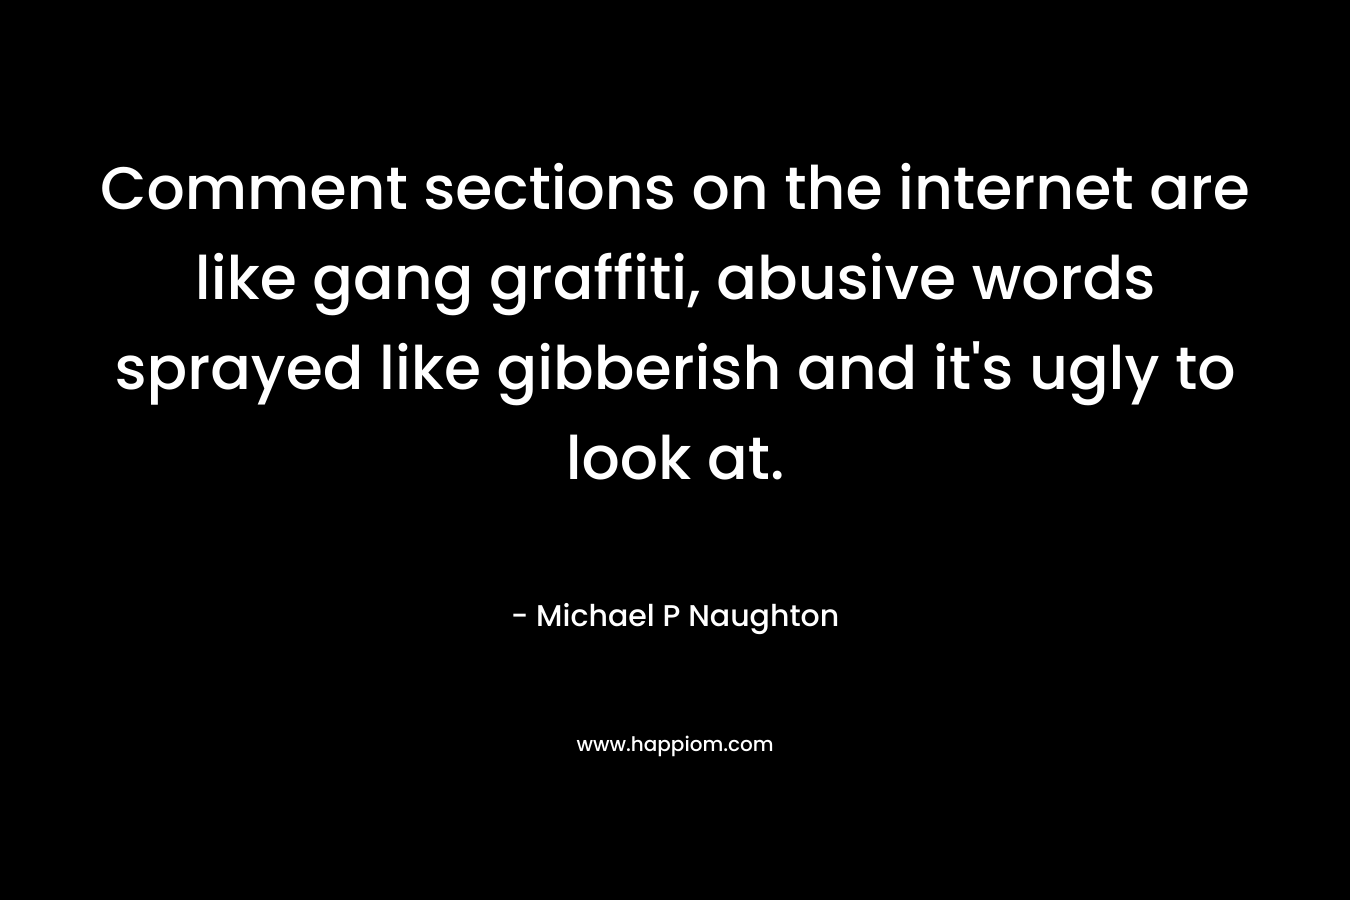 Comment sections on the internet are like gang graffiti, abusive words sprayed like gibberish and it’s ugly to look at. – Michael P Naughton